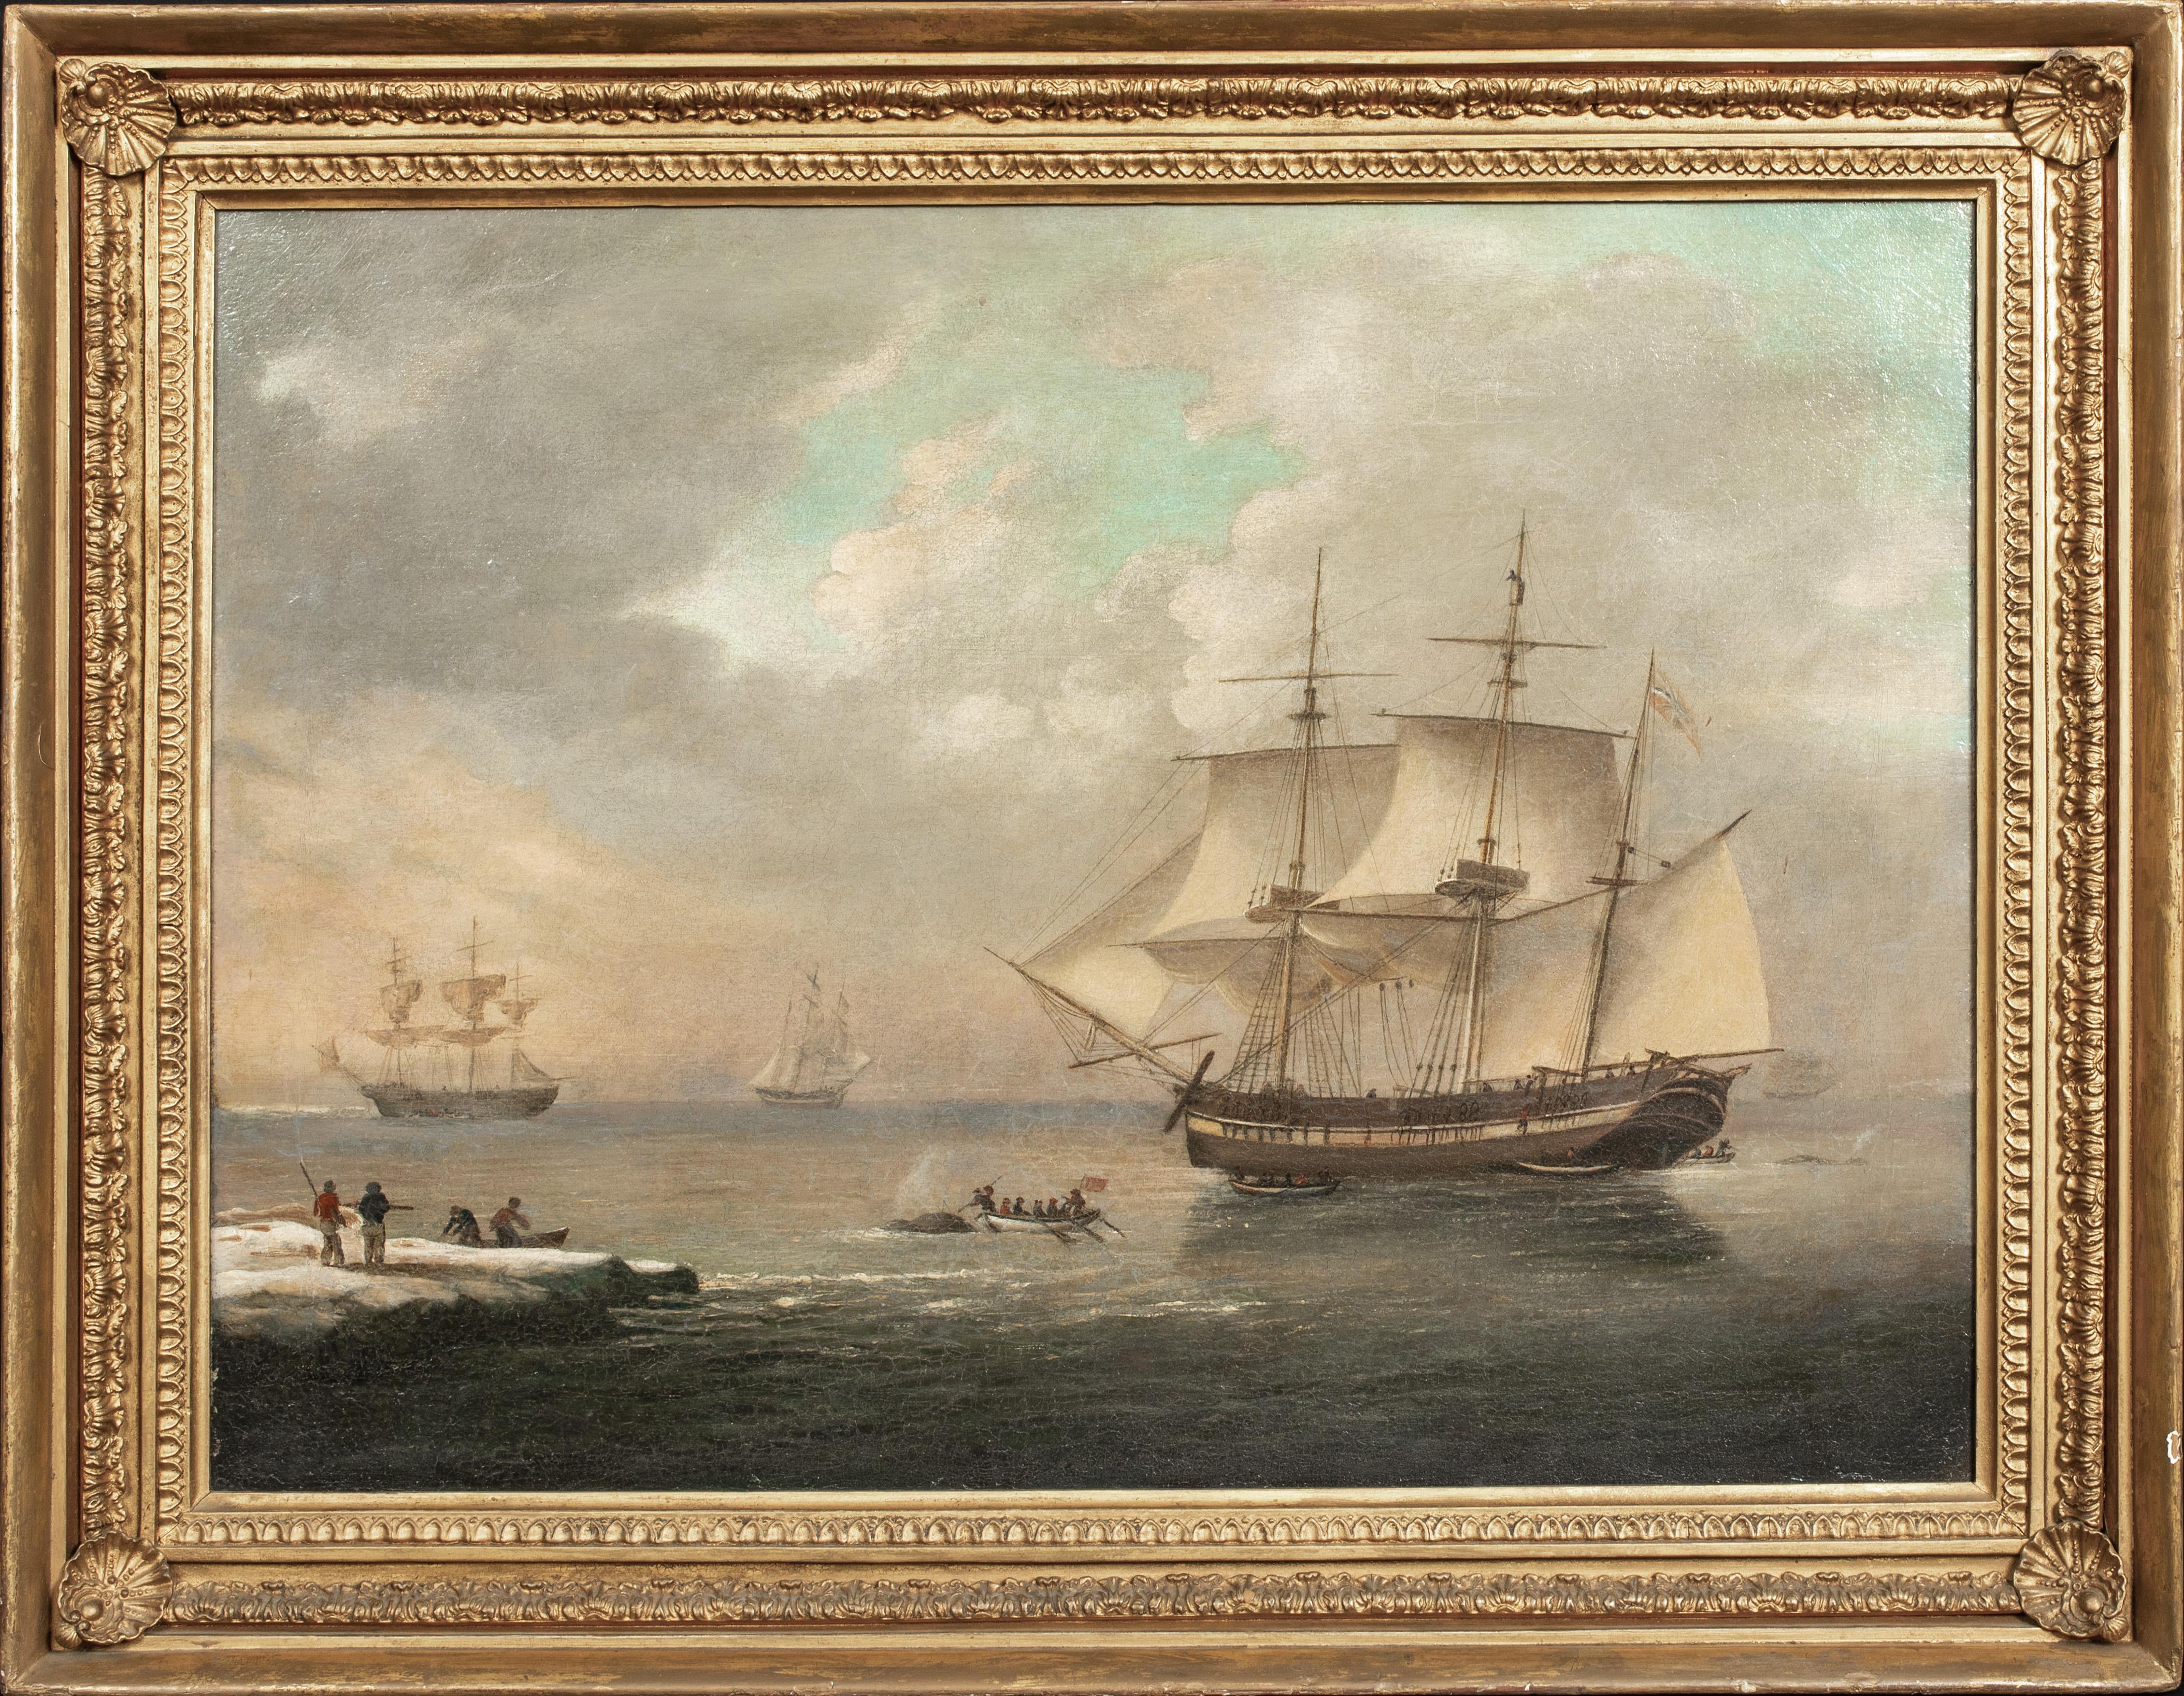 Robert Willoughby Of Hull Landscape Painting - British Ships Whaling In The Artic, 18th Century